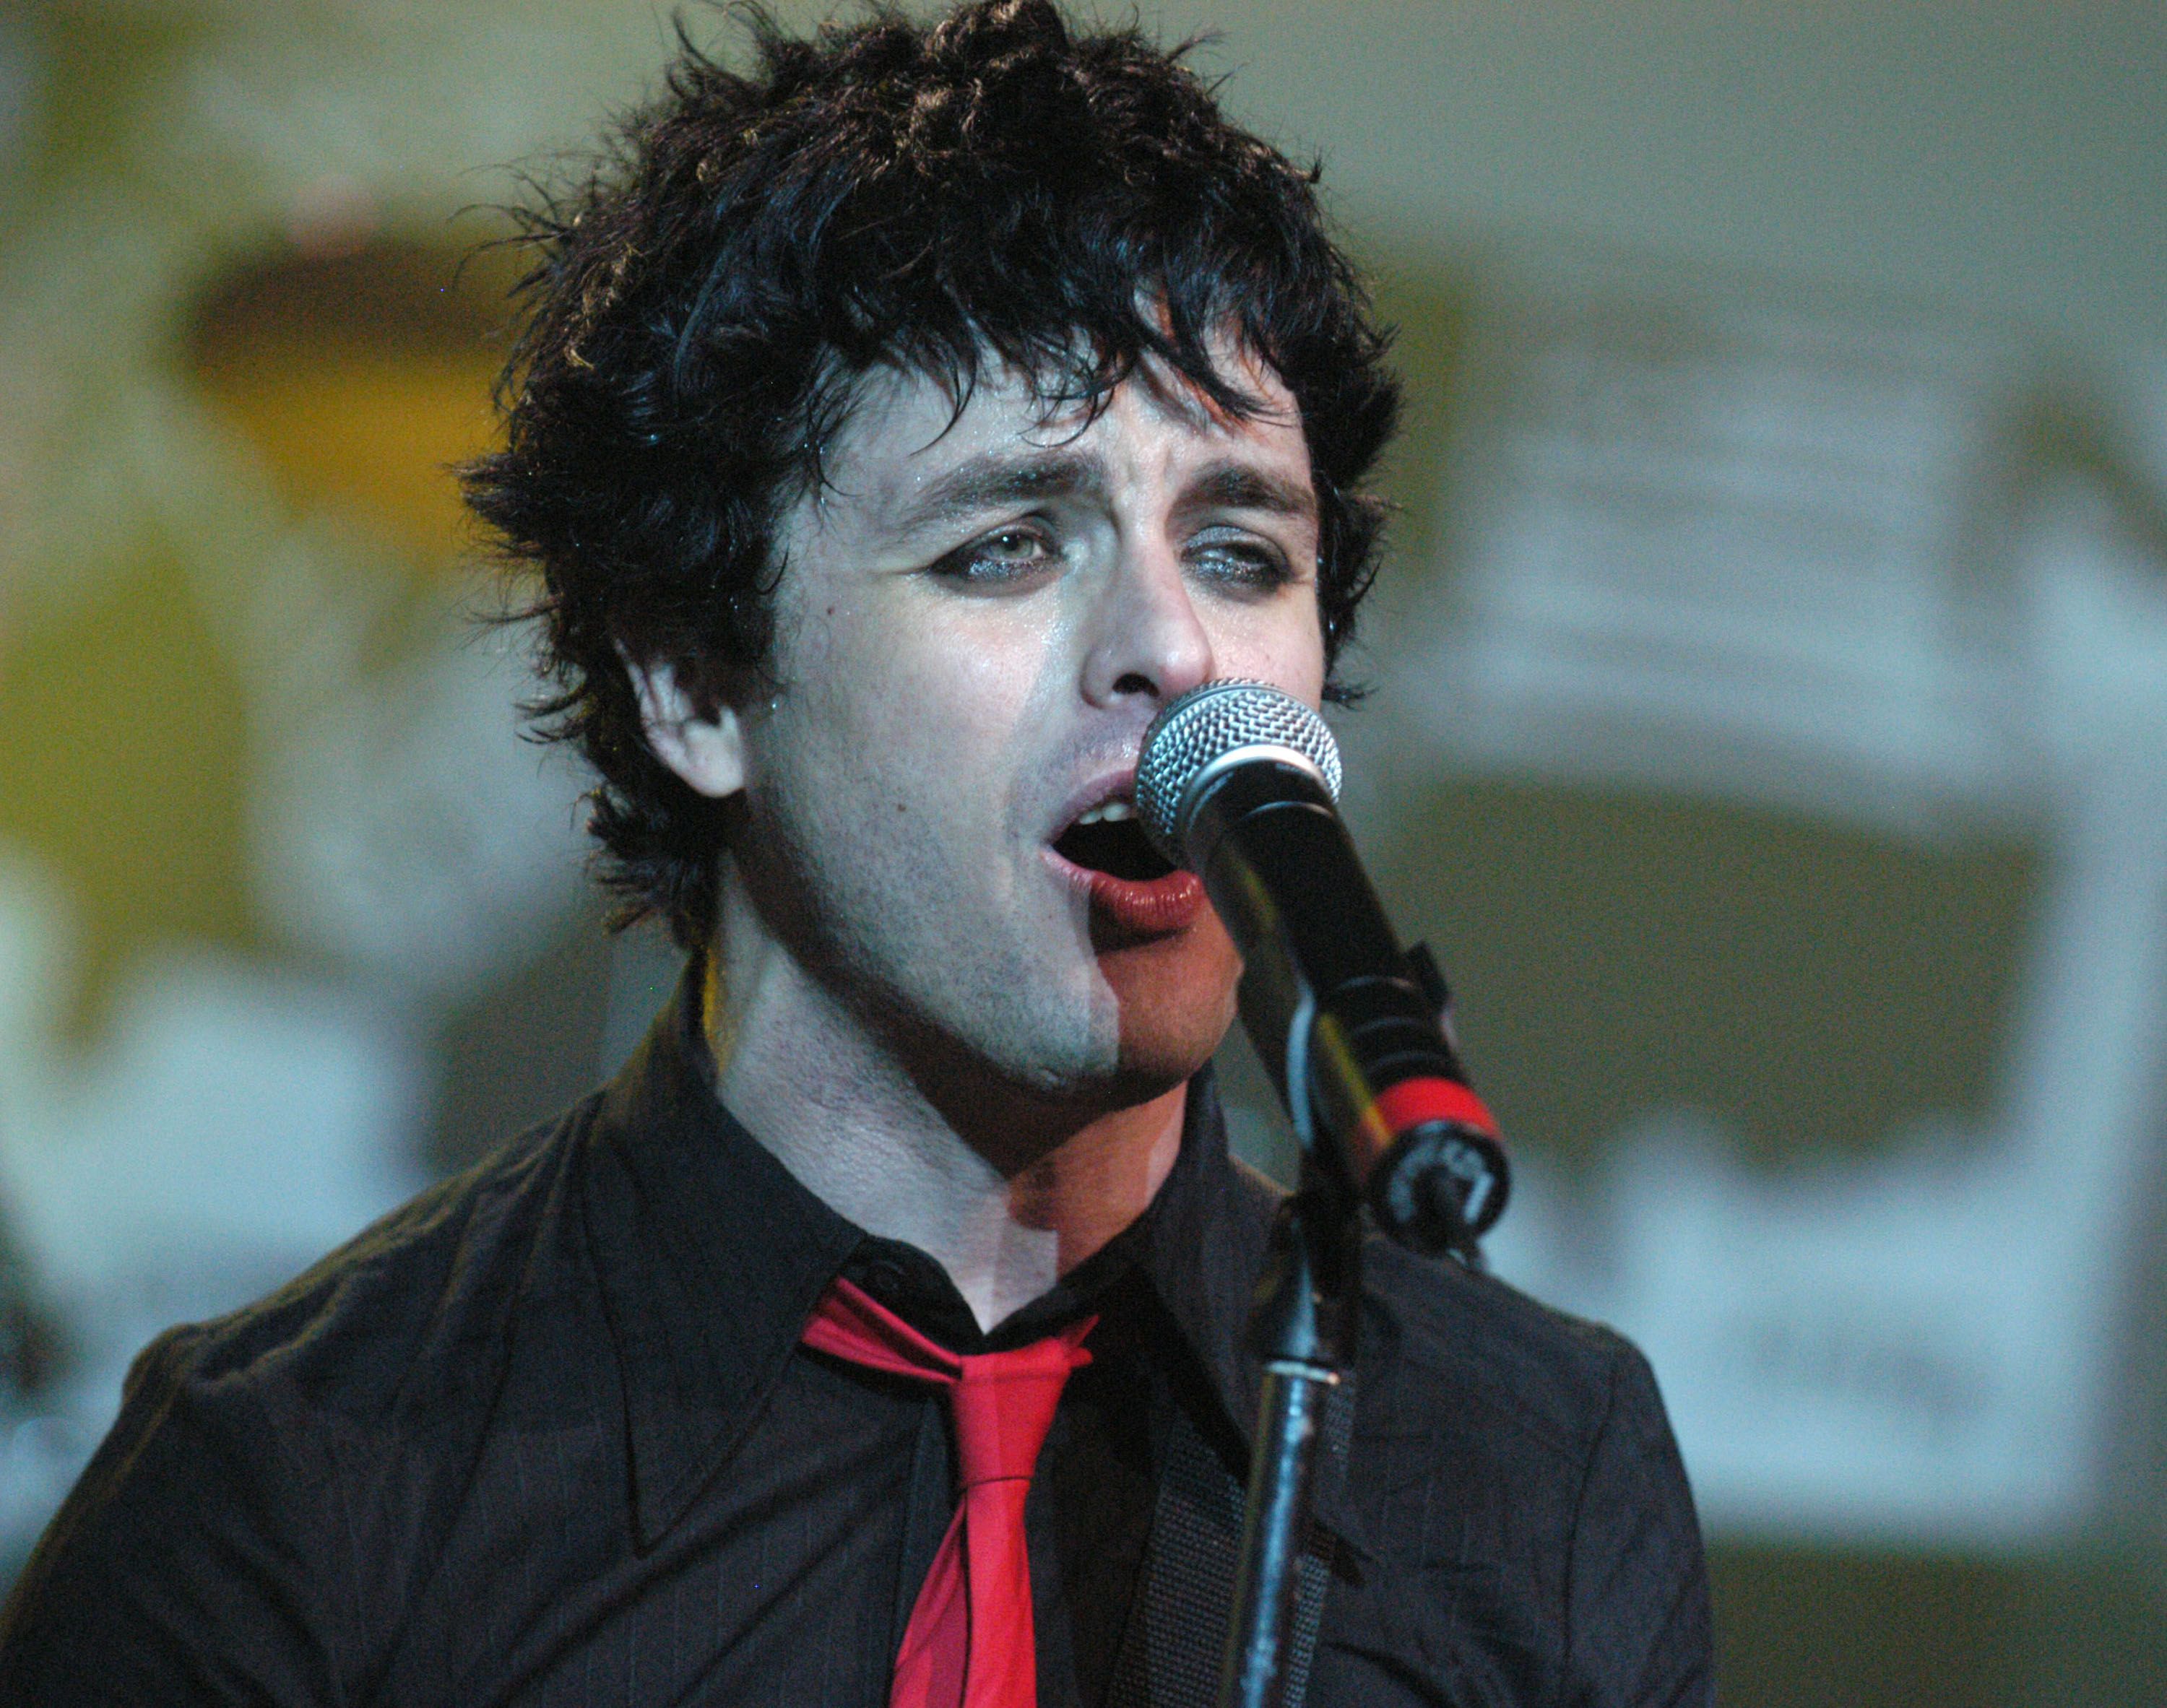 Billie Joe Armstrong performing on stage in a red tie